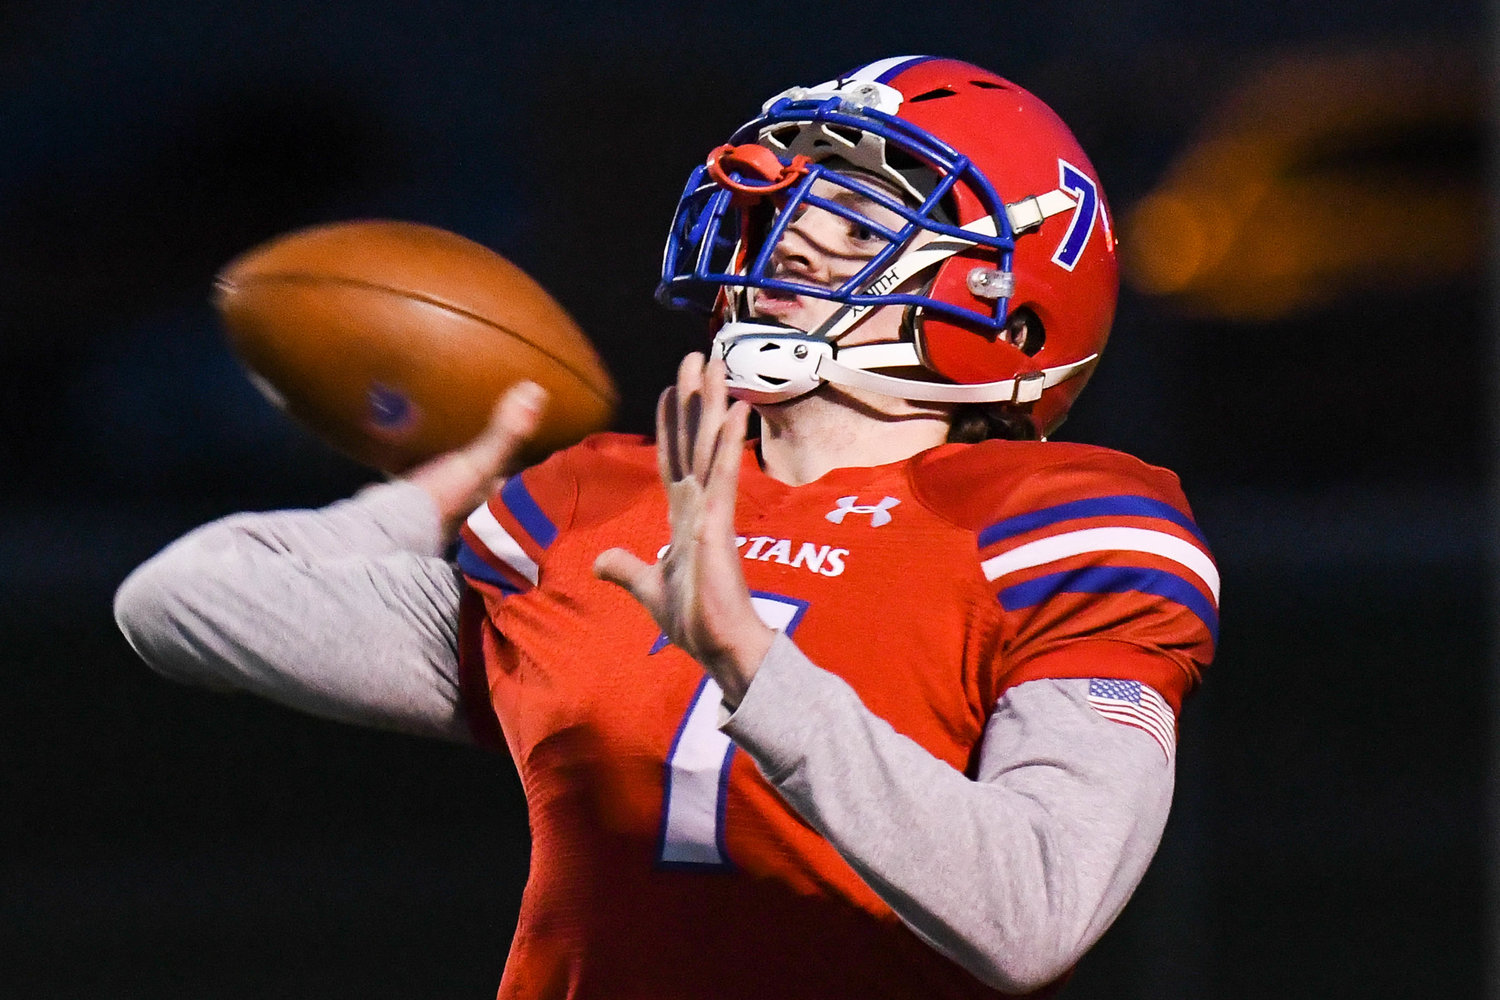 New Hartford quarterback Dominic Ambrose throws a pass during the game against Corcoran on Friday night in New Hartford. Ambrose scored the game's opening touchdown on a short run and the Spartans won 21-12 to advance to the Section III Class A semifinals.